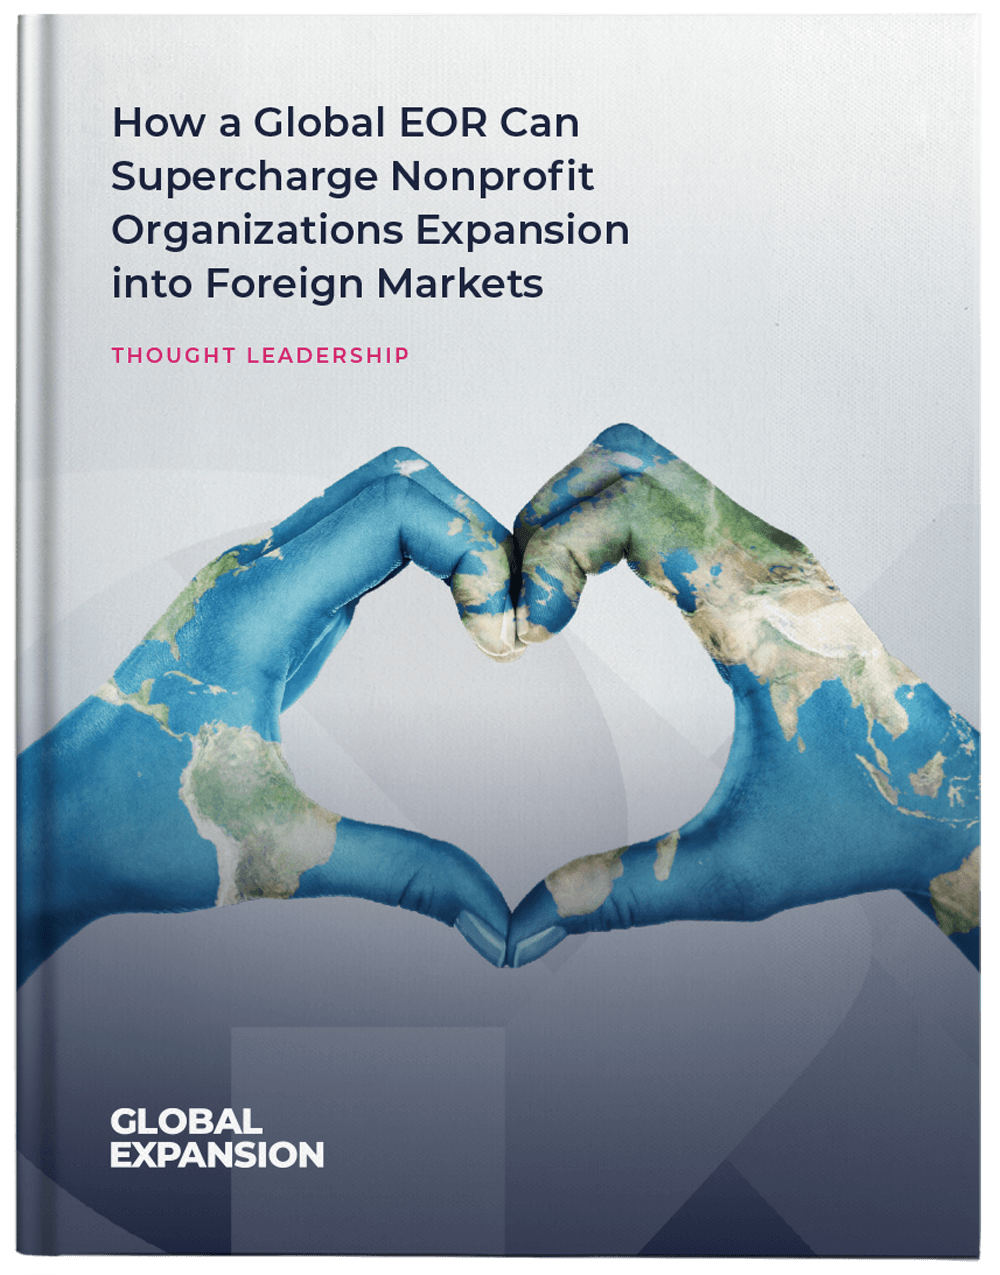 How-a-Global-EOR-Can-Supercharge-Nonprofit-Organizations-Expansion-into-Foreign-Markets-Cover